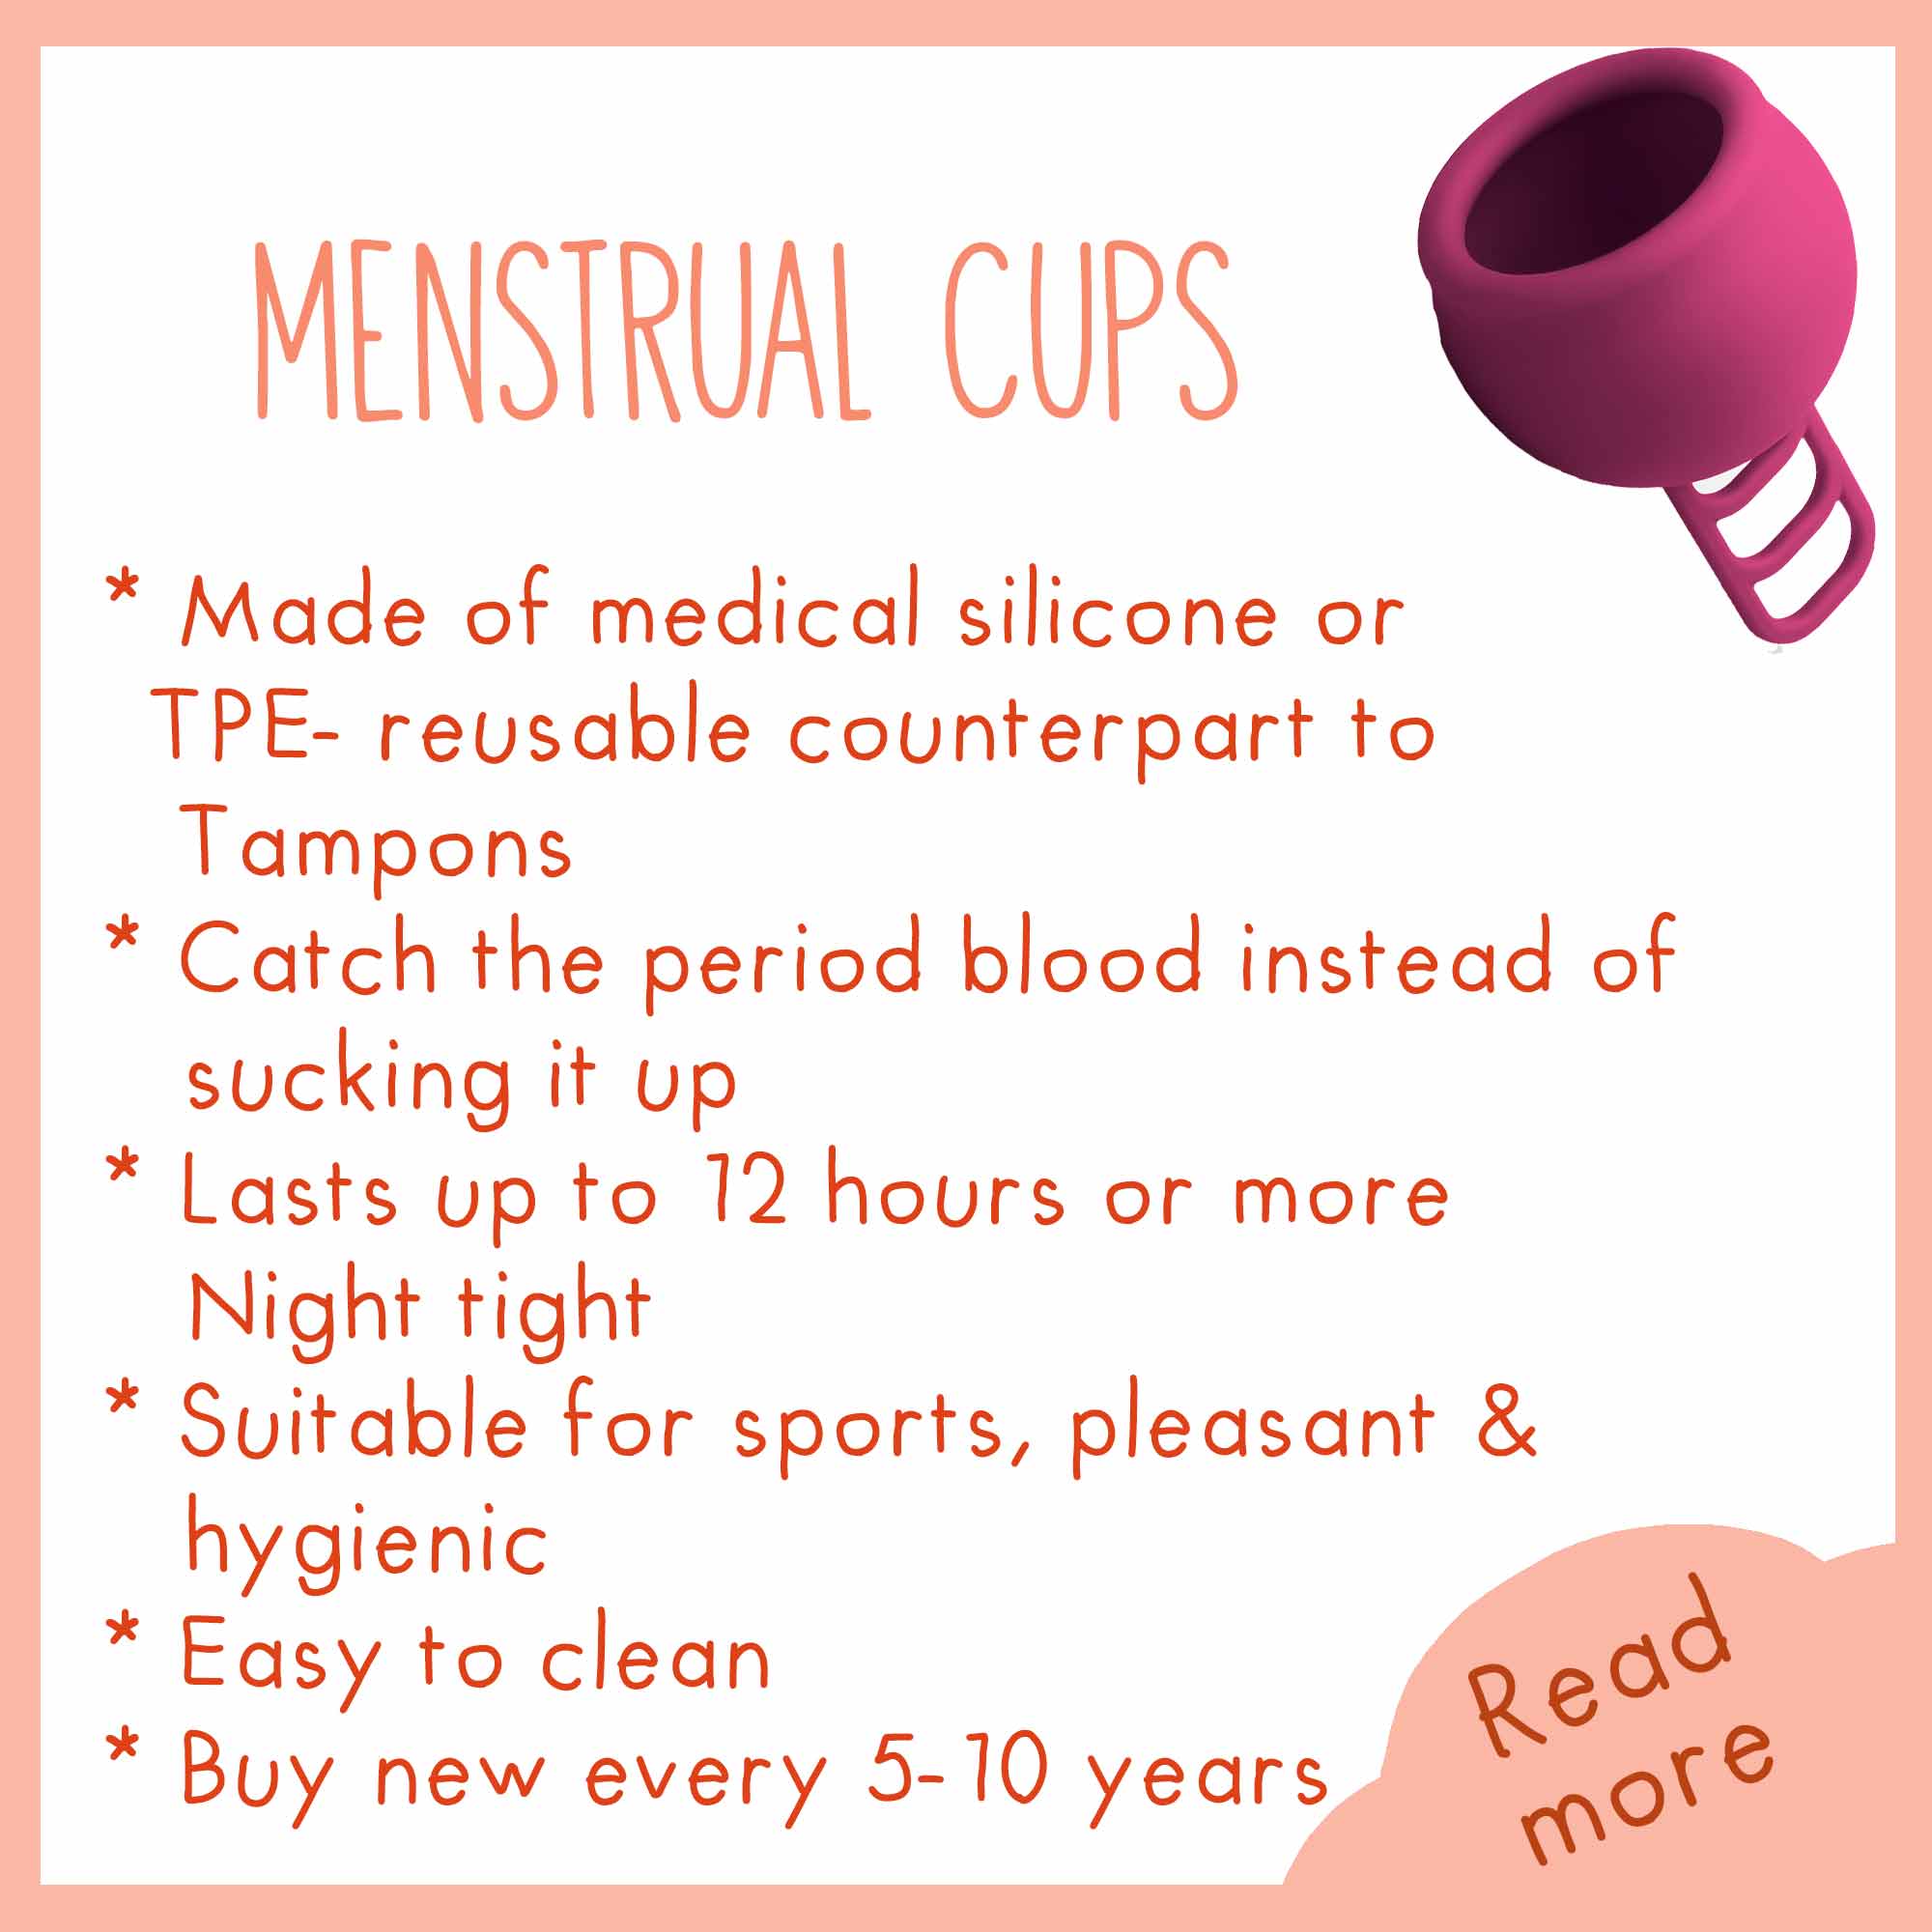 Menstrual cups, made of medical silicone or TPE-reusable counterpart to Tampons, catch the period blood instead of sucking it up, lasts up to 12 hours or more, night tight, suitable for sports, pleasant / hygienic, easy to clean, buy new every 5-10 years.